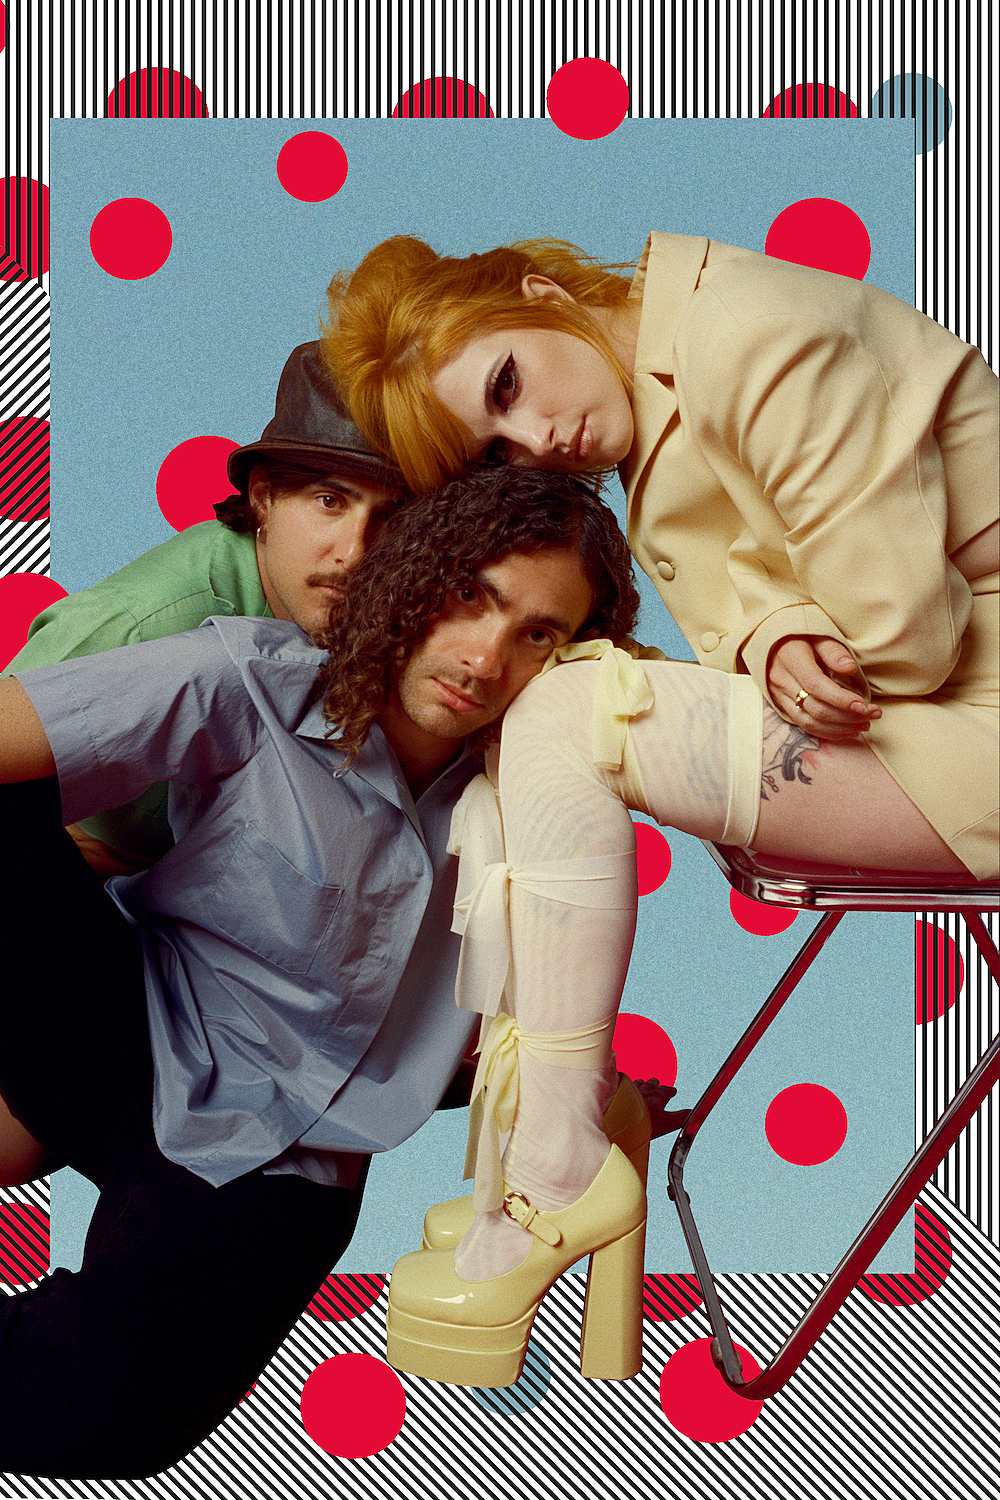 Paramore talk new album 'This Is Why' and ﻿how they became one of the most influential, beloved groups on the planet